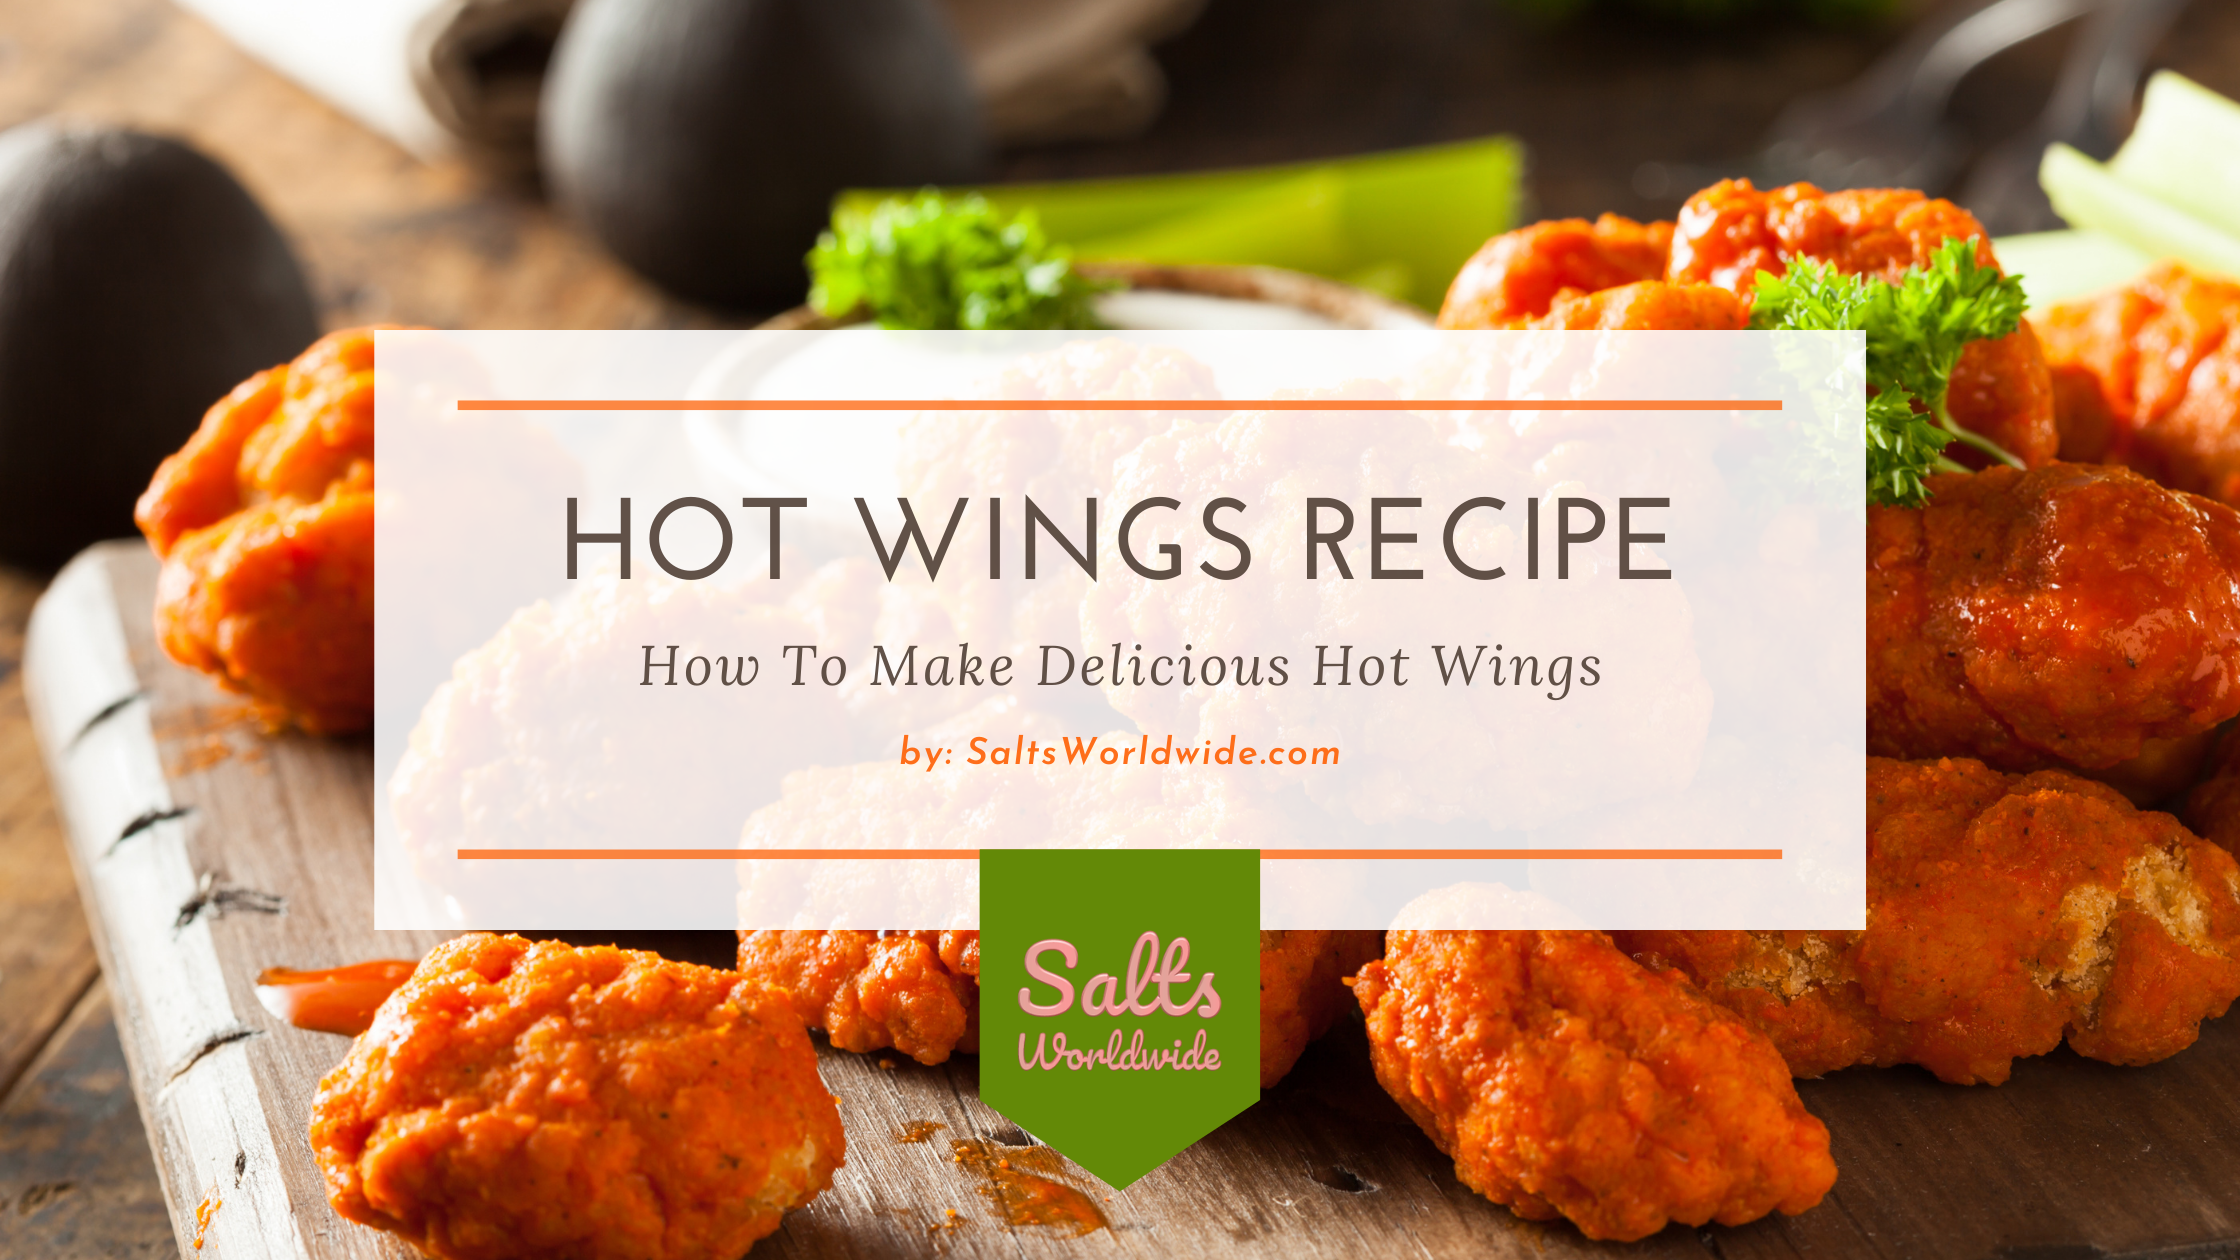 Hot Wings Recipe - How To Make Delicious Hot Wings